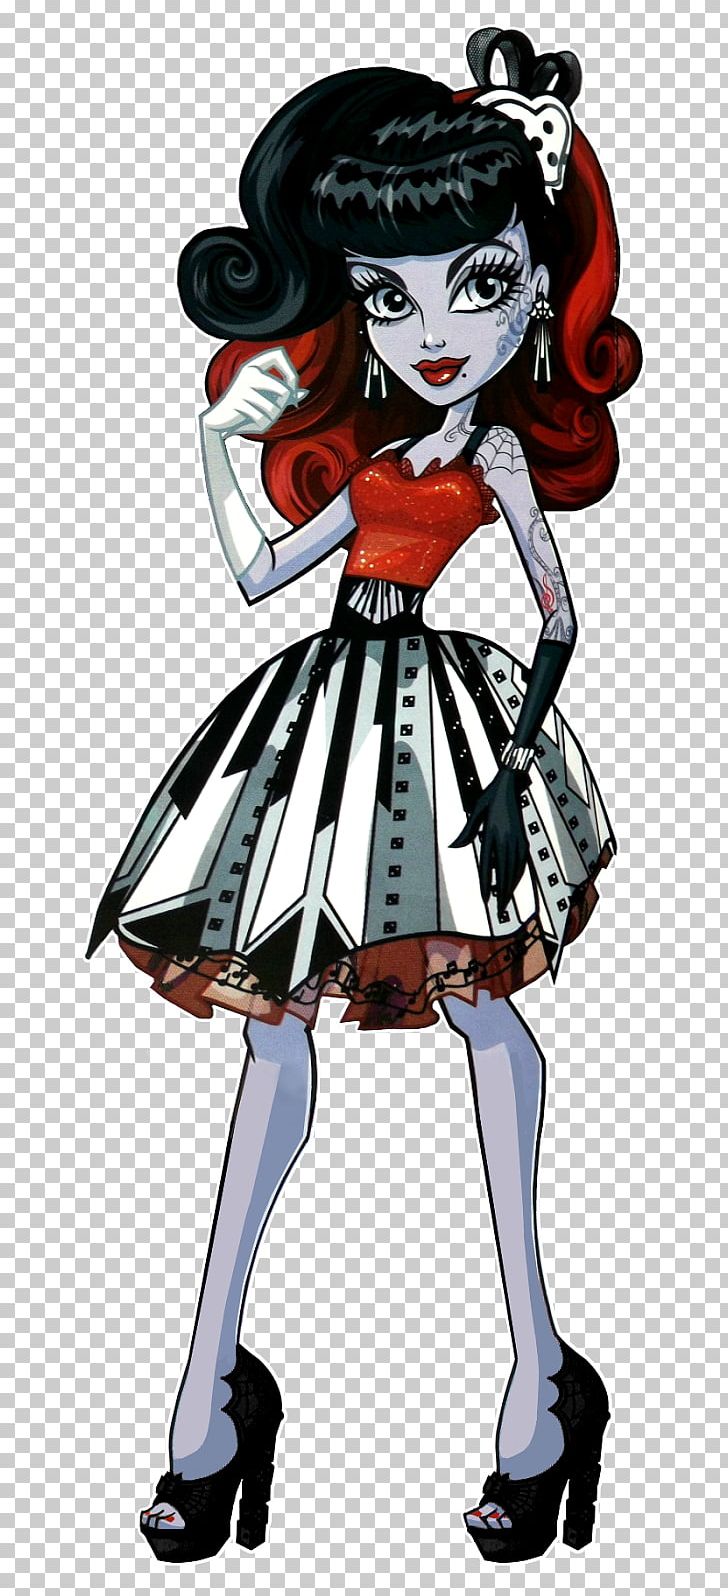 Monster High Operetta Doll The Phantom Of The Opera PNG, Clipart, Anime, Art, Costume Design, Doll, Drawing Free PNG Download